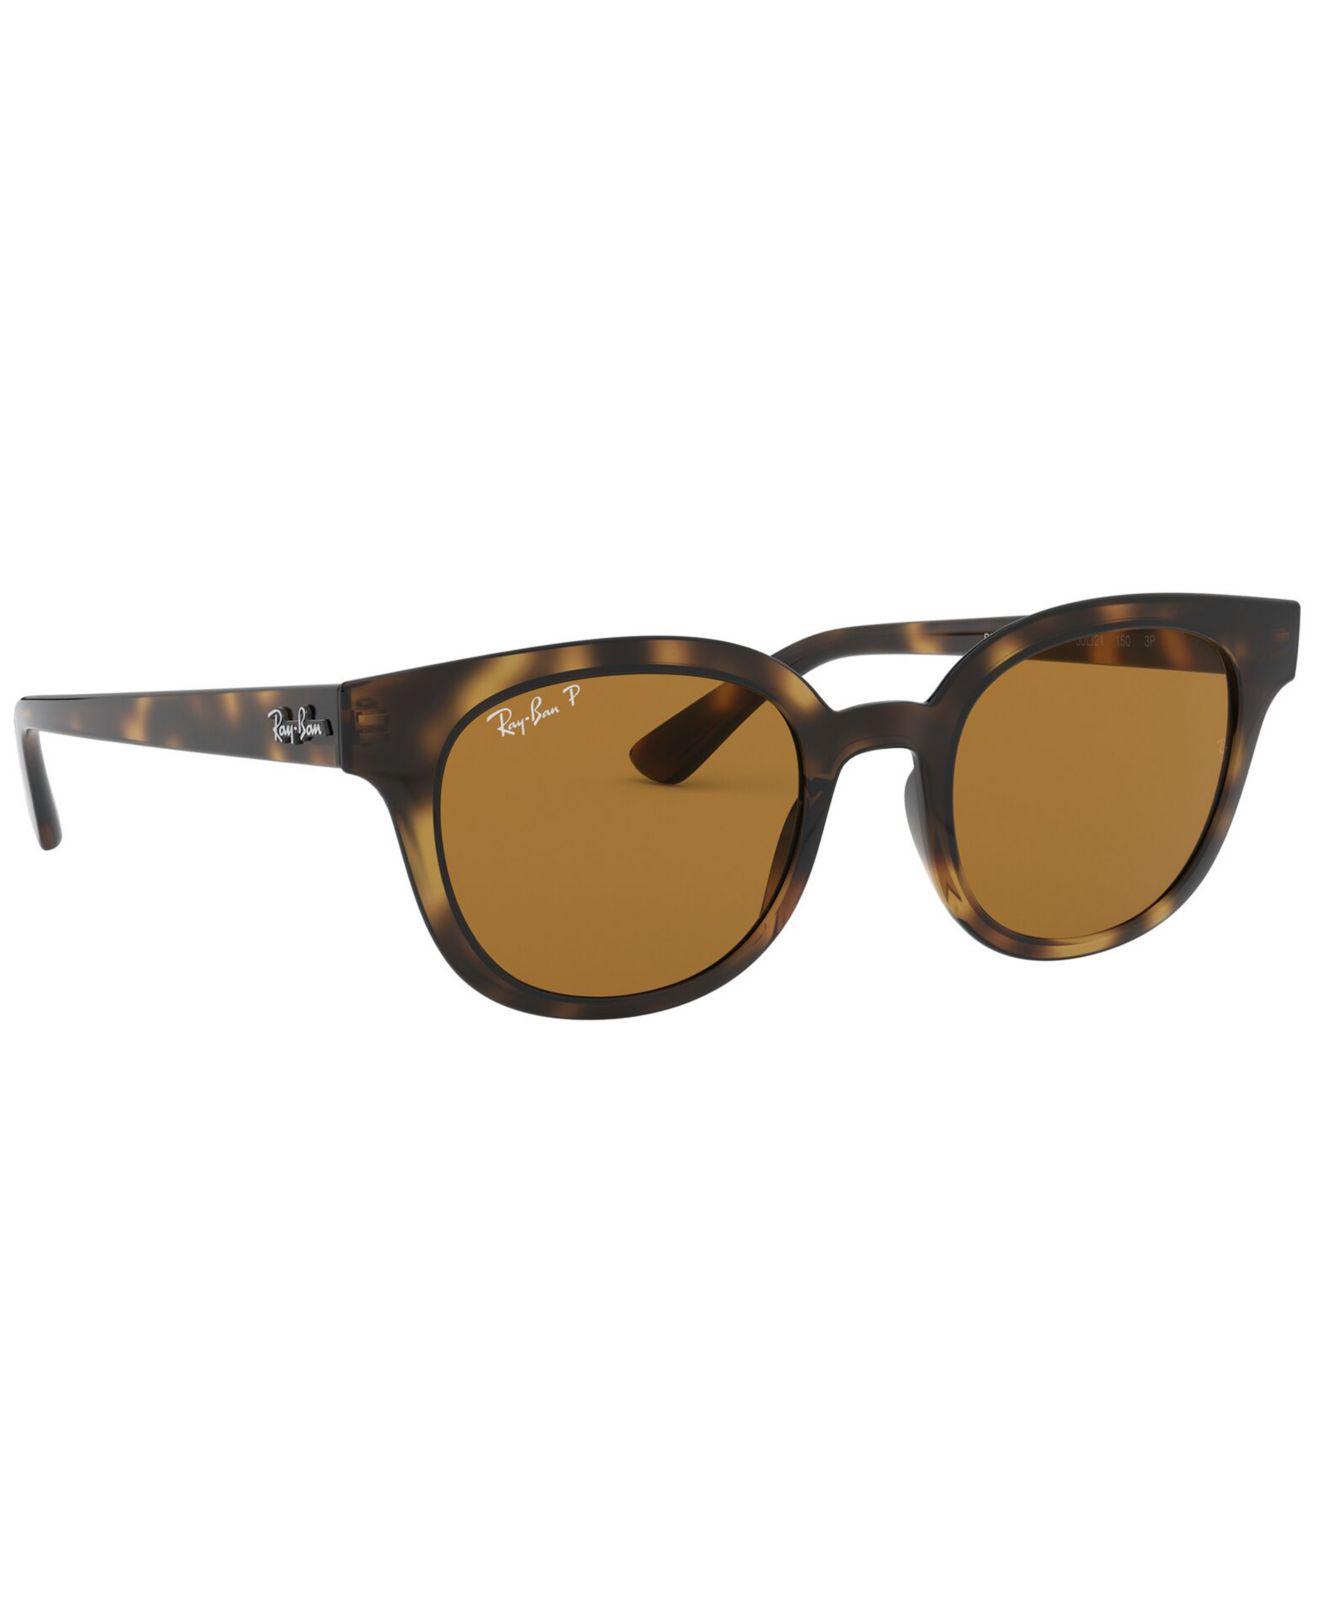 Ray Ban Polarized Sunglasses Rb4324 50 In Brown Lyst